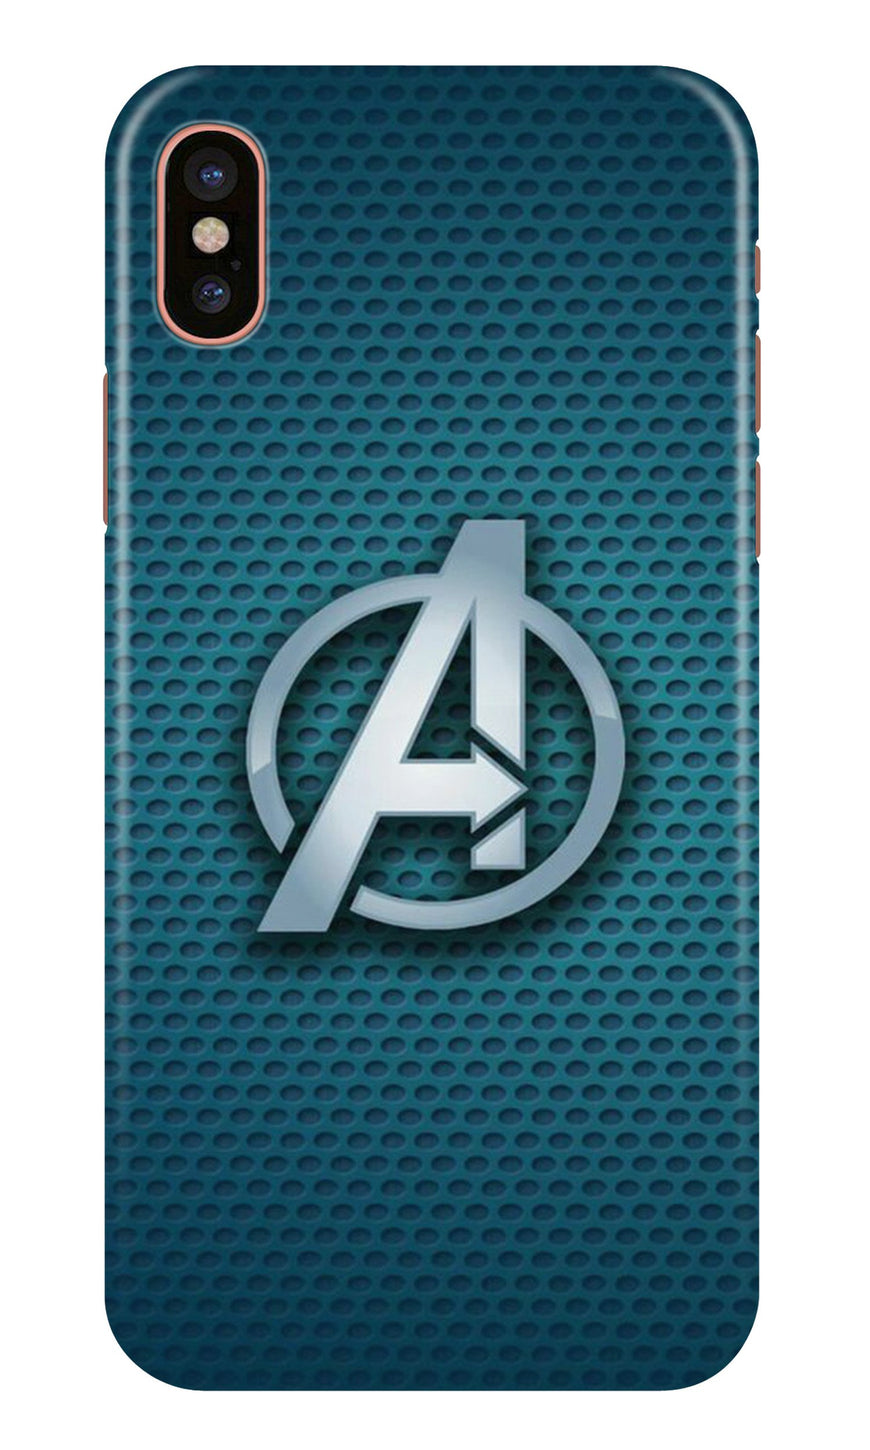 Avengers Case for iPhone Xr (Design No. 246)